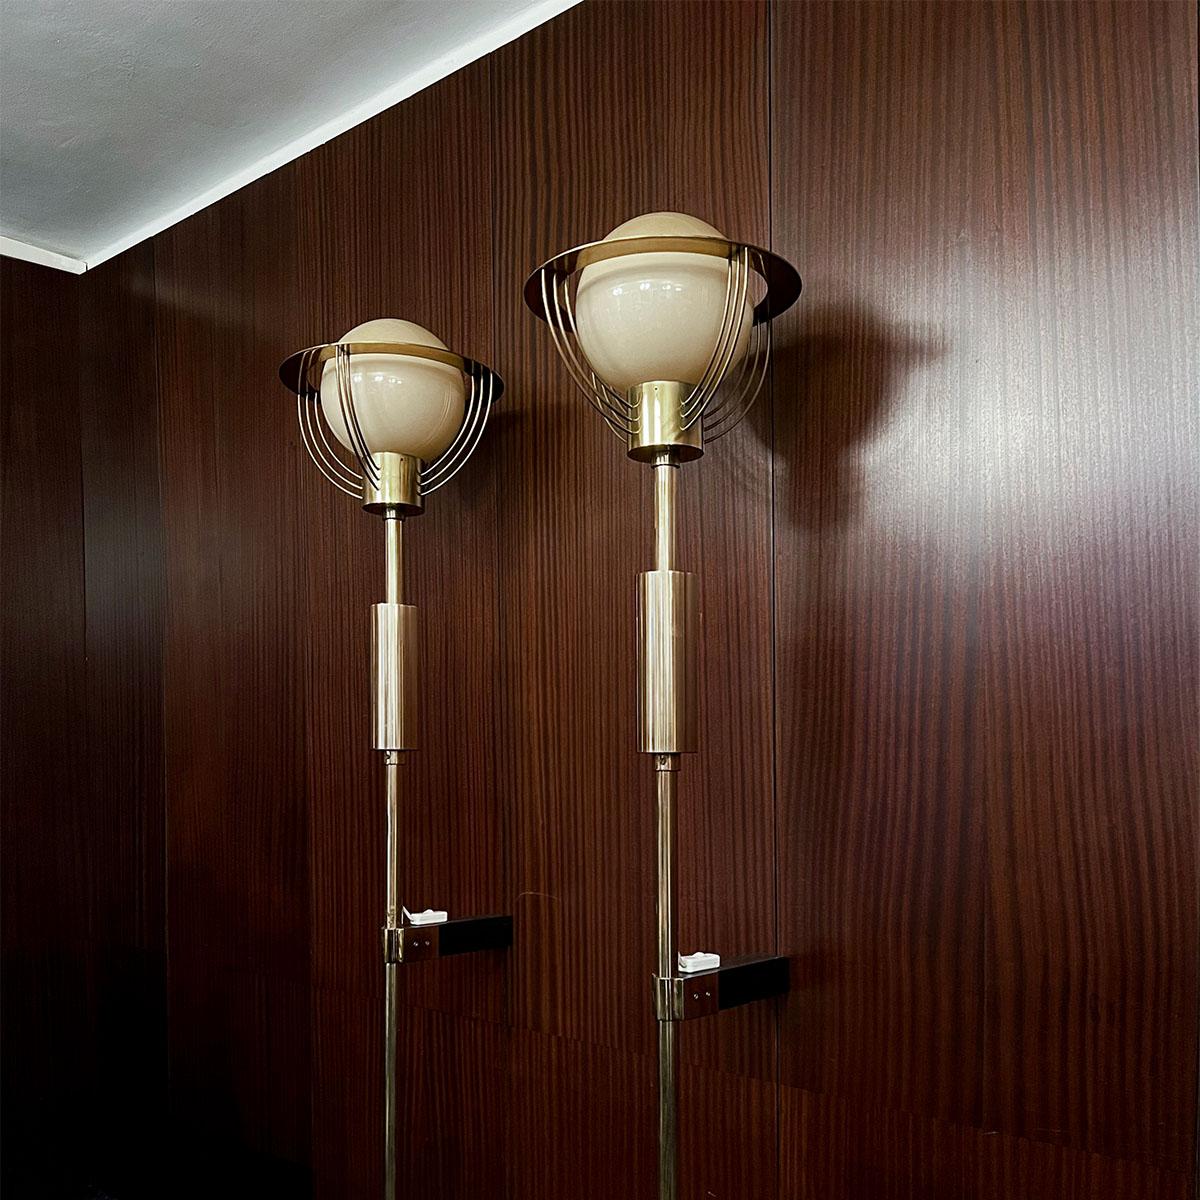 Pair of large sculptural brass wall torchieres with milk glass shades, manufactured in former Czechoslovakia, 1930s.

These large sculptural brass wall torchieres were manufactured in former Czechoslovakia in the 1930s and each consists of a